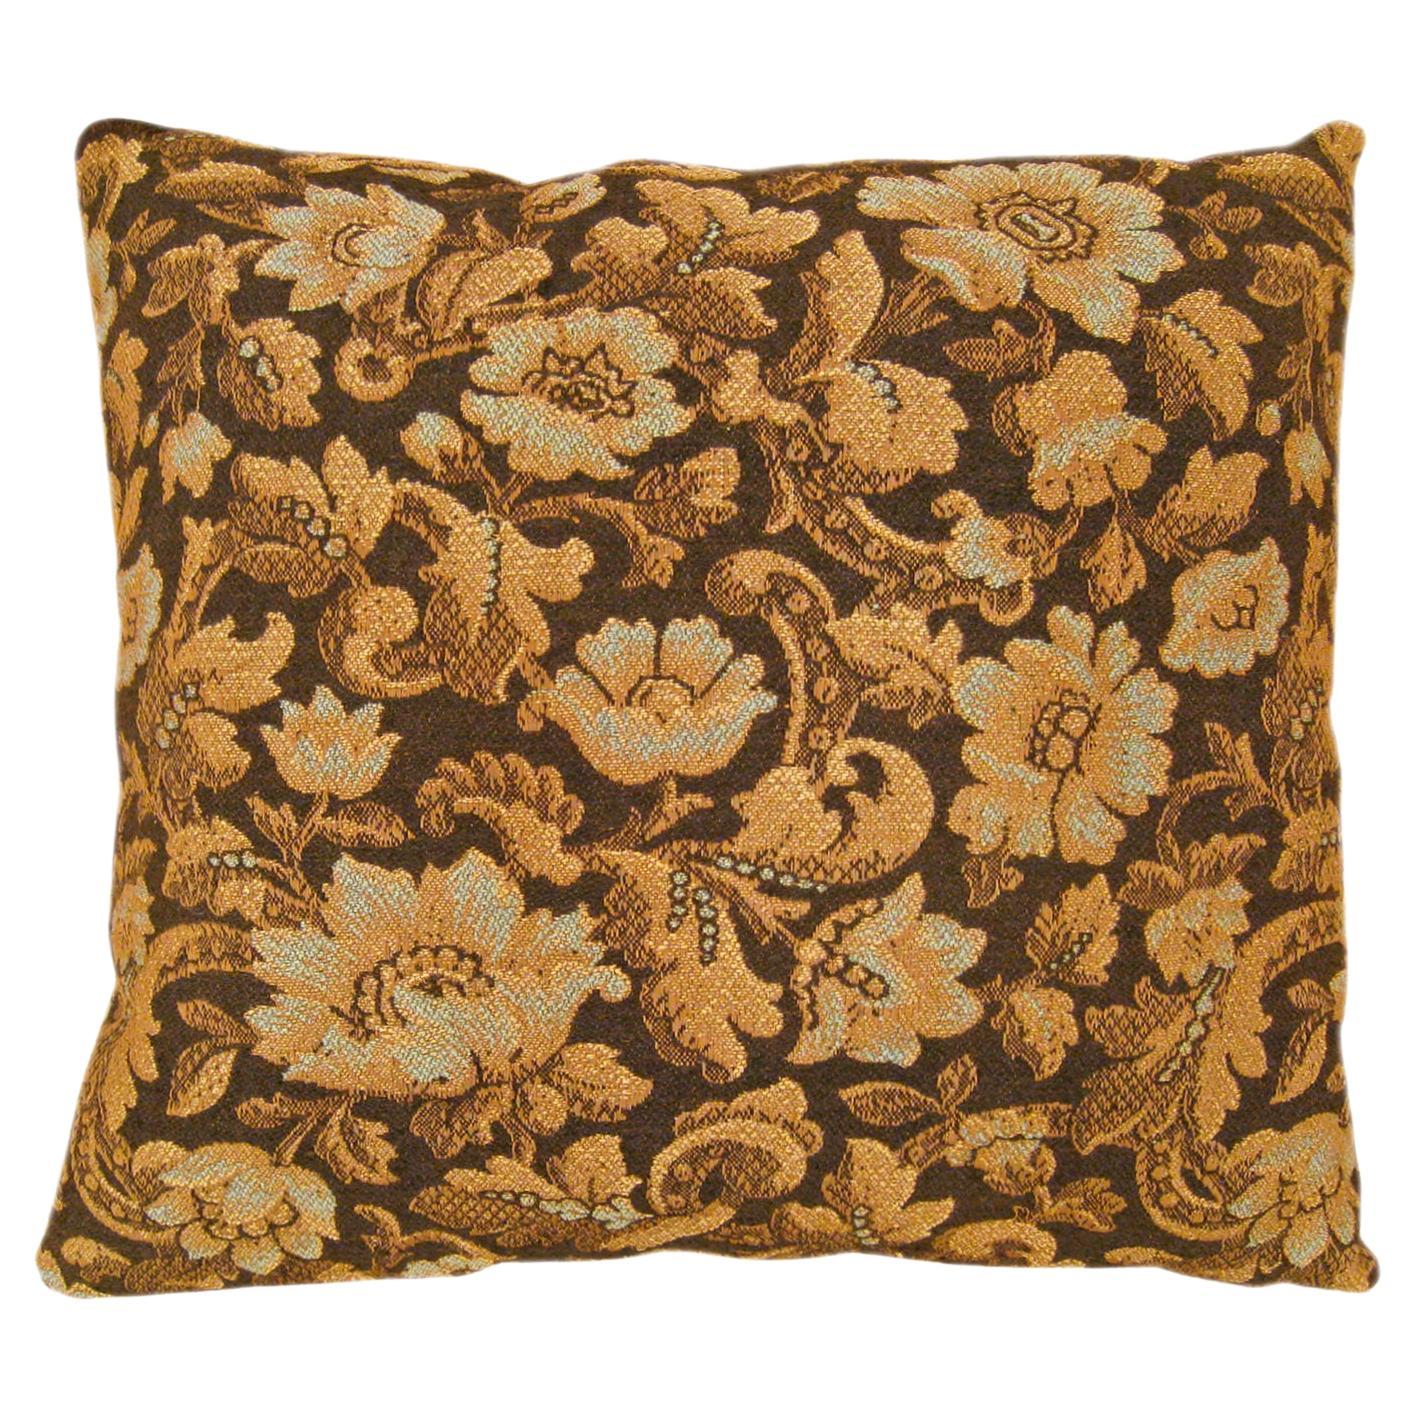 Decorative Antique Jacquard Tapestry Pillow with Floral Elements Allover  For Sale